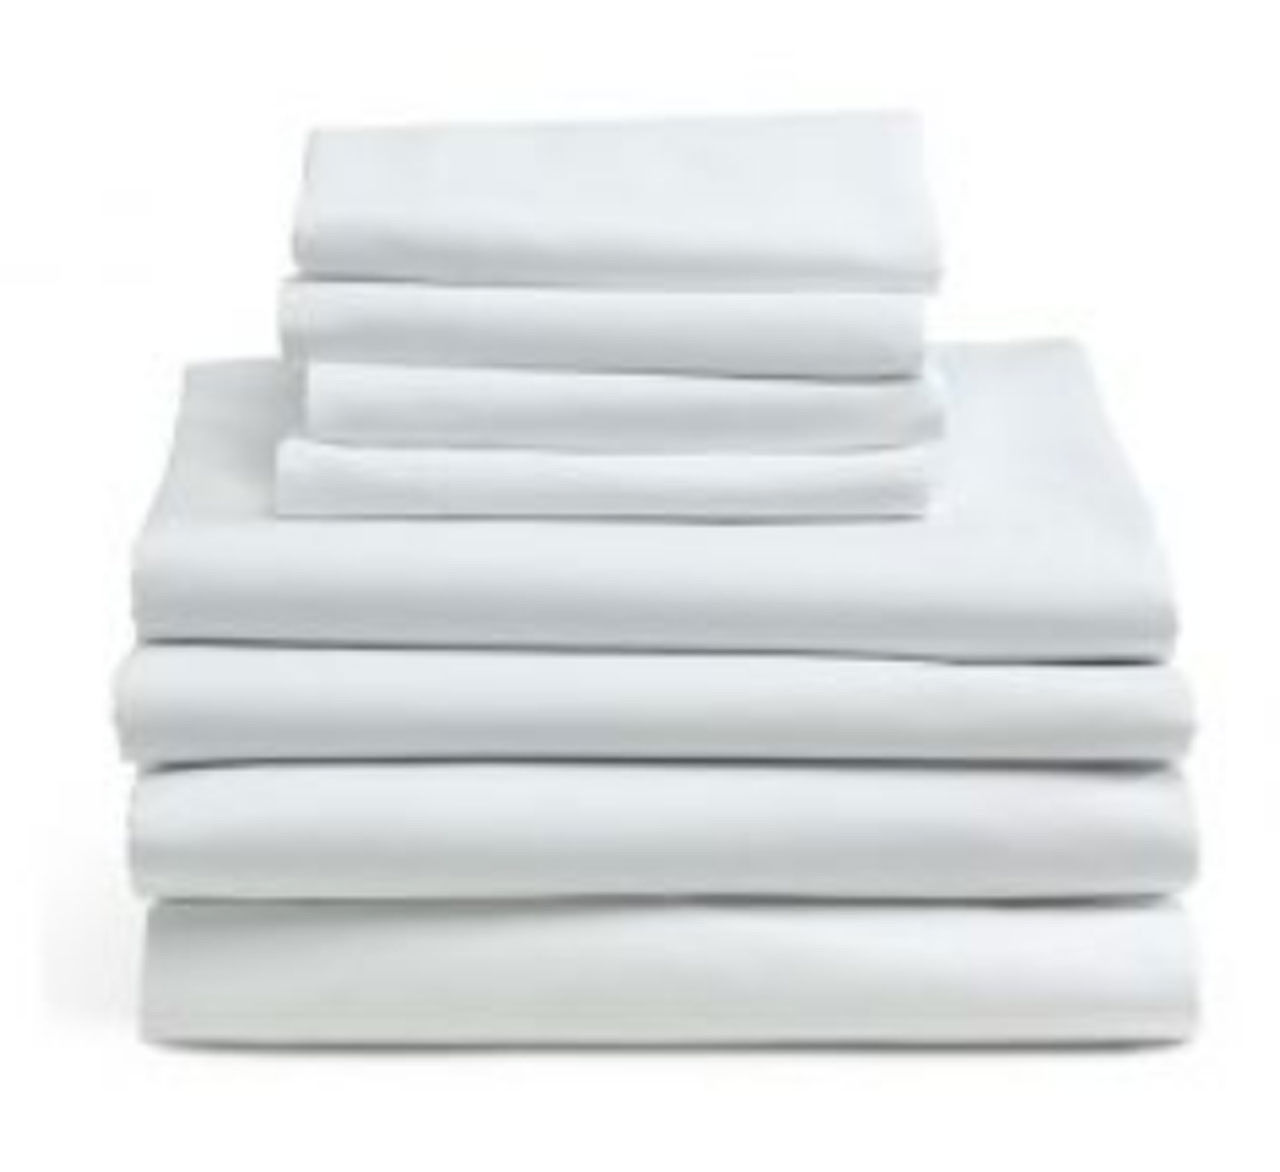 How can Royal Star T-180 Hospitality Bed Sheets from Royal Star Wholesale transform your bedroom?